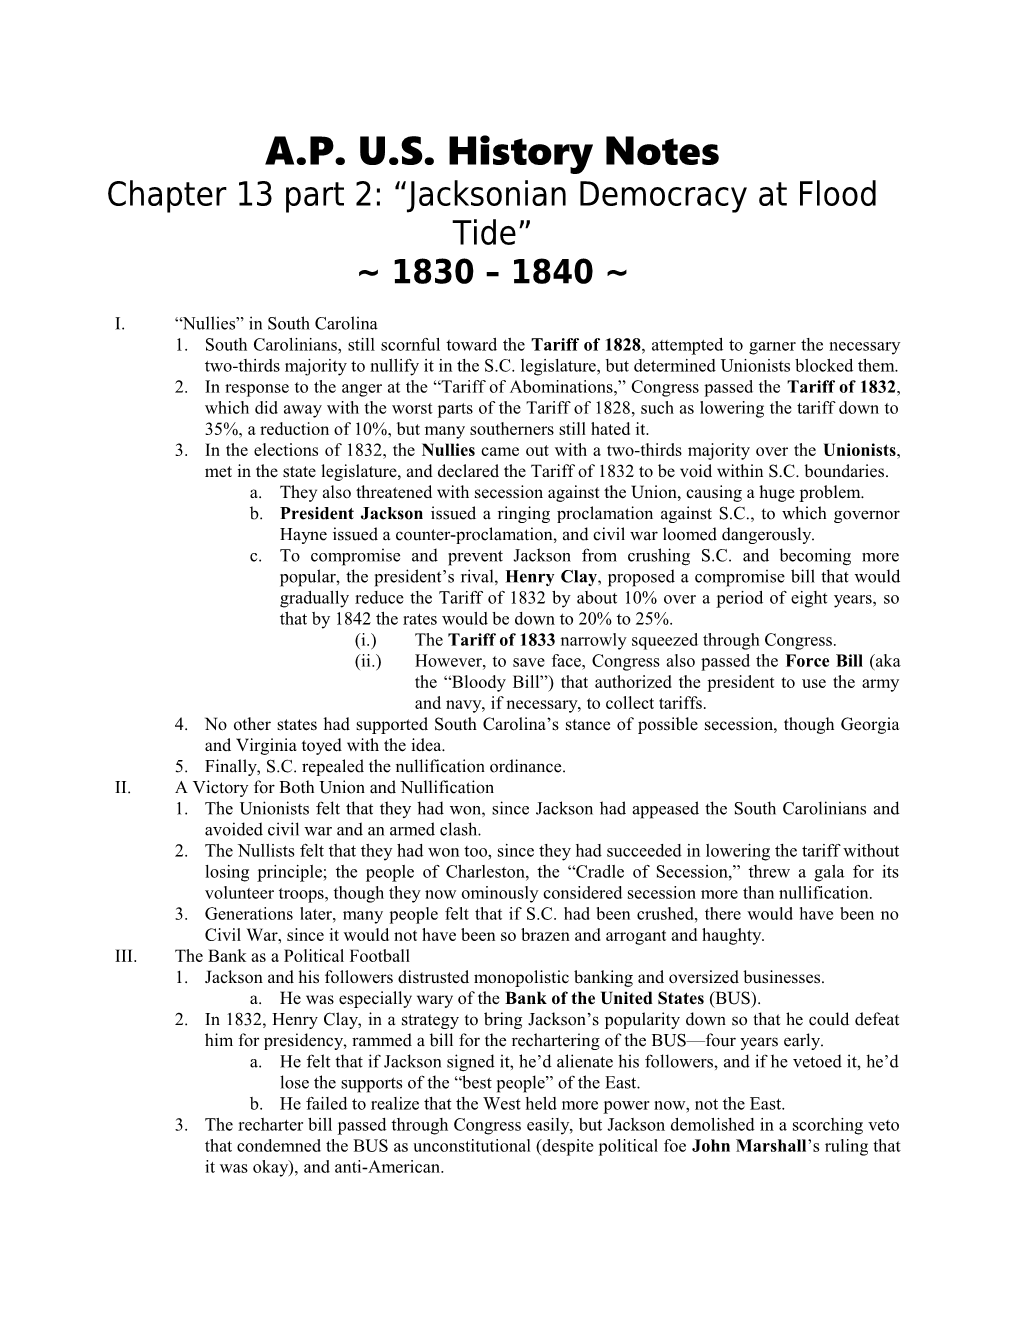 Chapter 13 Part 2: Jacksonian Democracy at Flood Tide